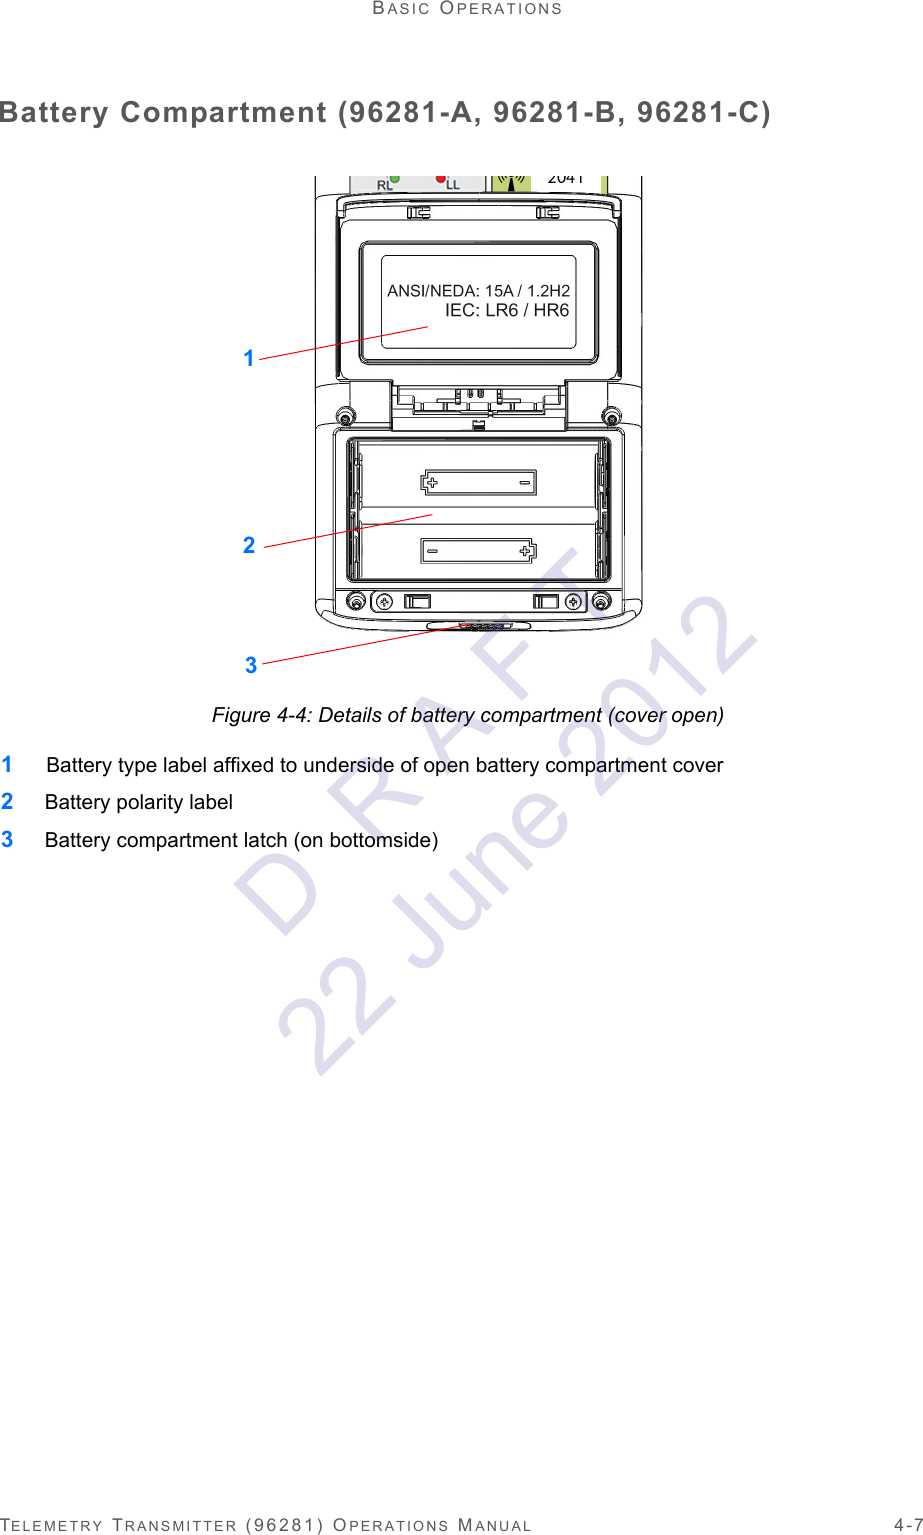 TELEMETRY TRANSMITTER (96281) OPERATIONS MANUAL 4-7BASIC OPERATIONSBattery Compartment (96281-A, 96281-B, 96281-C)Figure 4-4: Details of battery compartment (cover open)1  Battery type label affixed to underside of open battery compartment cover2 Battery polarity label3 Battery compartment latch (on bottomside)123D  R A F T 22 June 2012